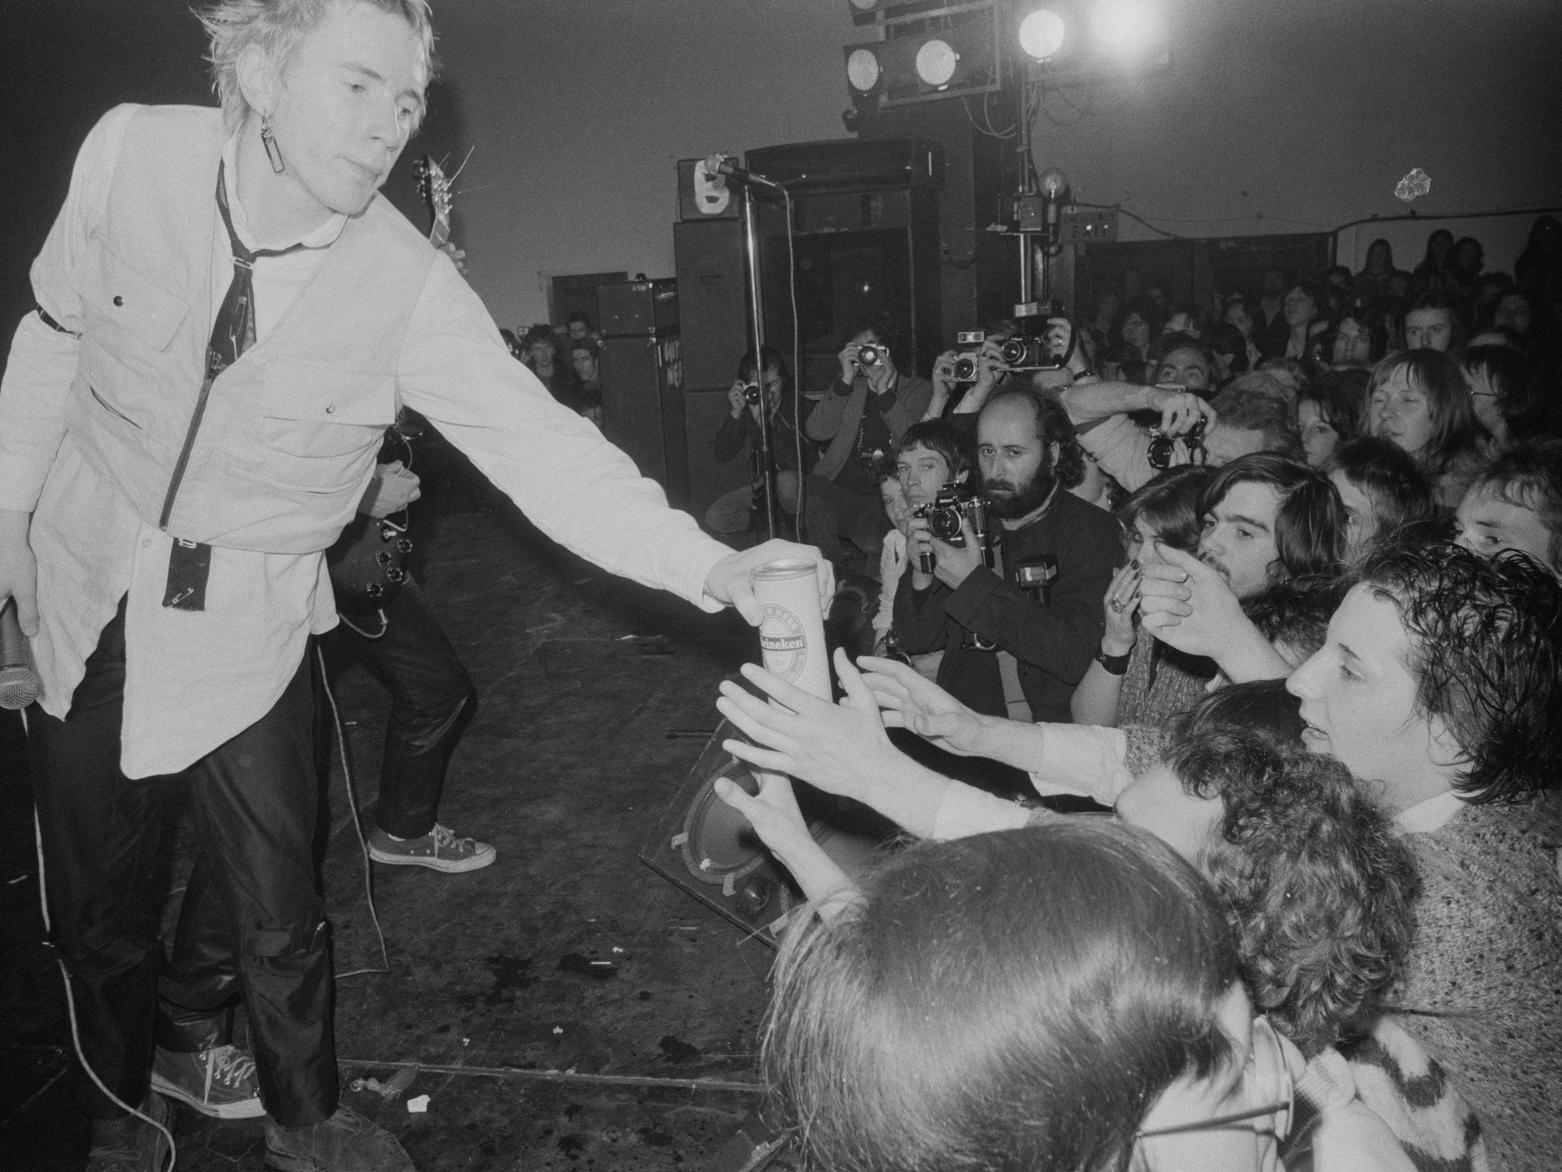 Johnny Rotten hands a can of beer to fans while on stage.